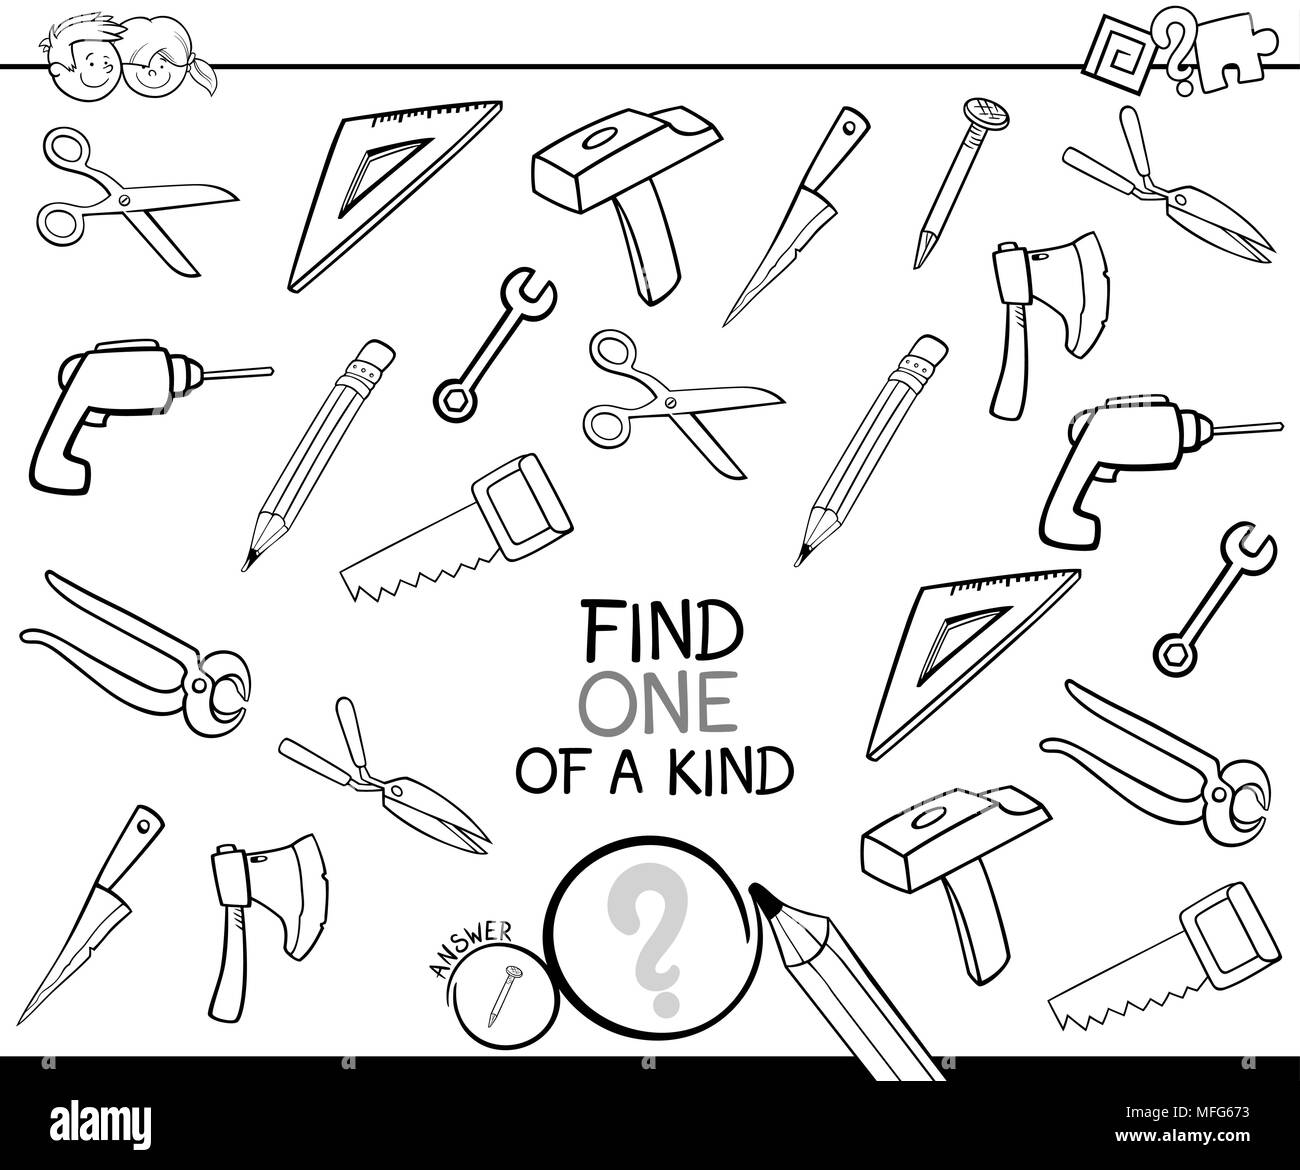 Black and White Cartoon Illustration of Find One of a Kind Picture Educational Activity Game for Children with Tools Objects Coloring Book Stock Vector